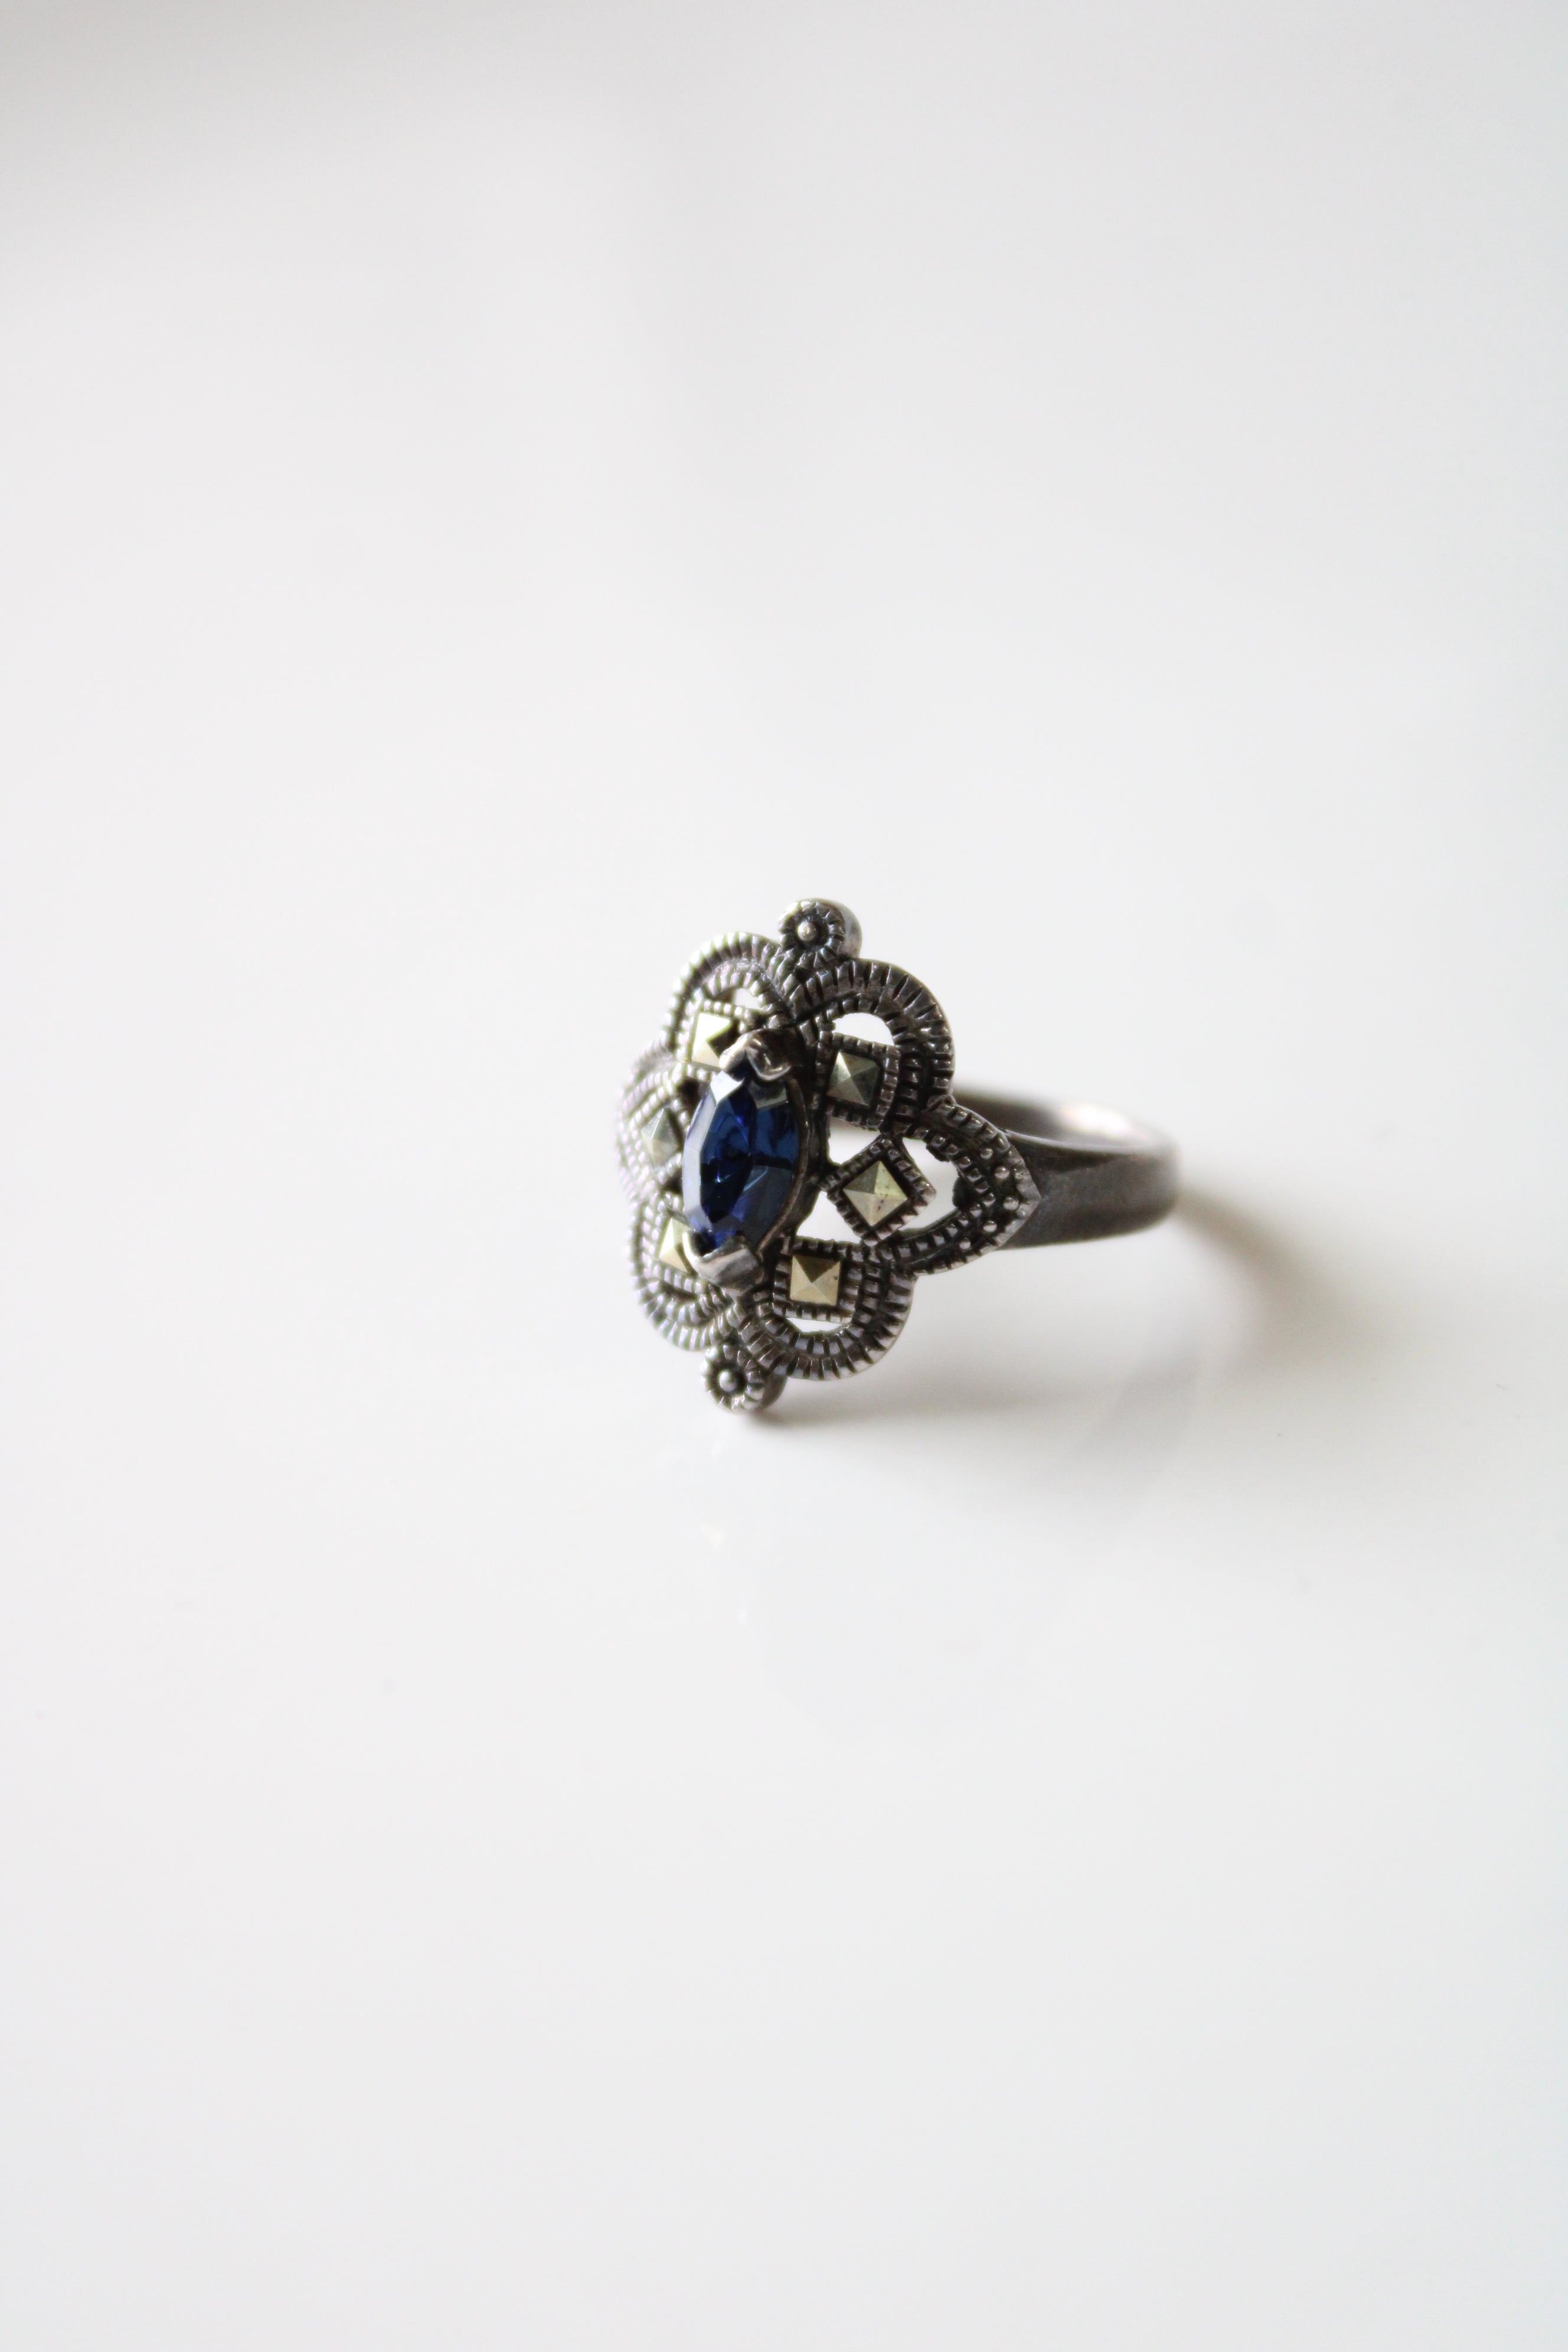 Marsala 925 Sterling Silver Marcasite Marquise Cut Blue Stone Ring | Size 5.5